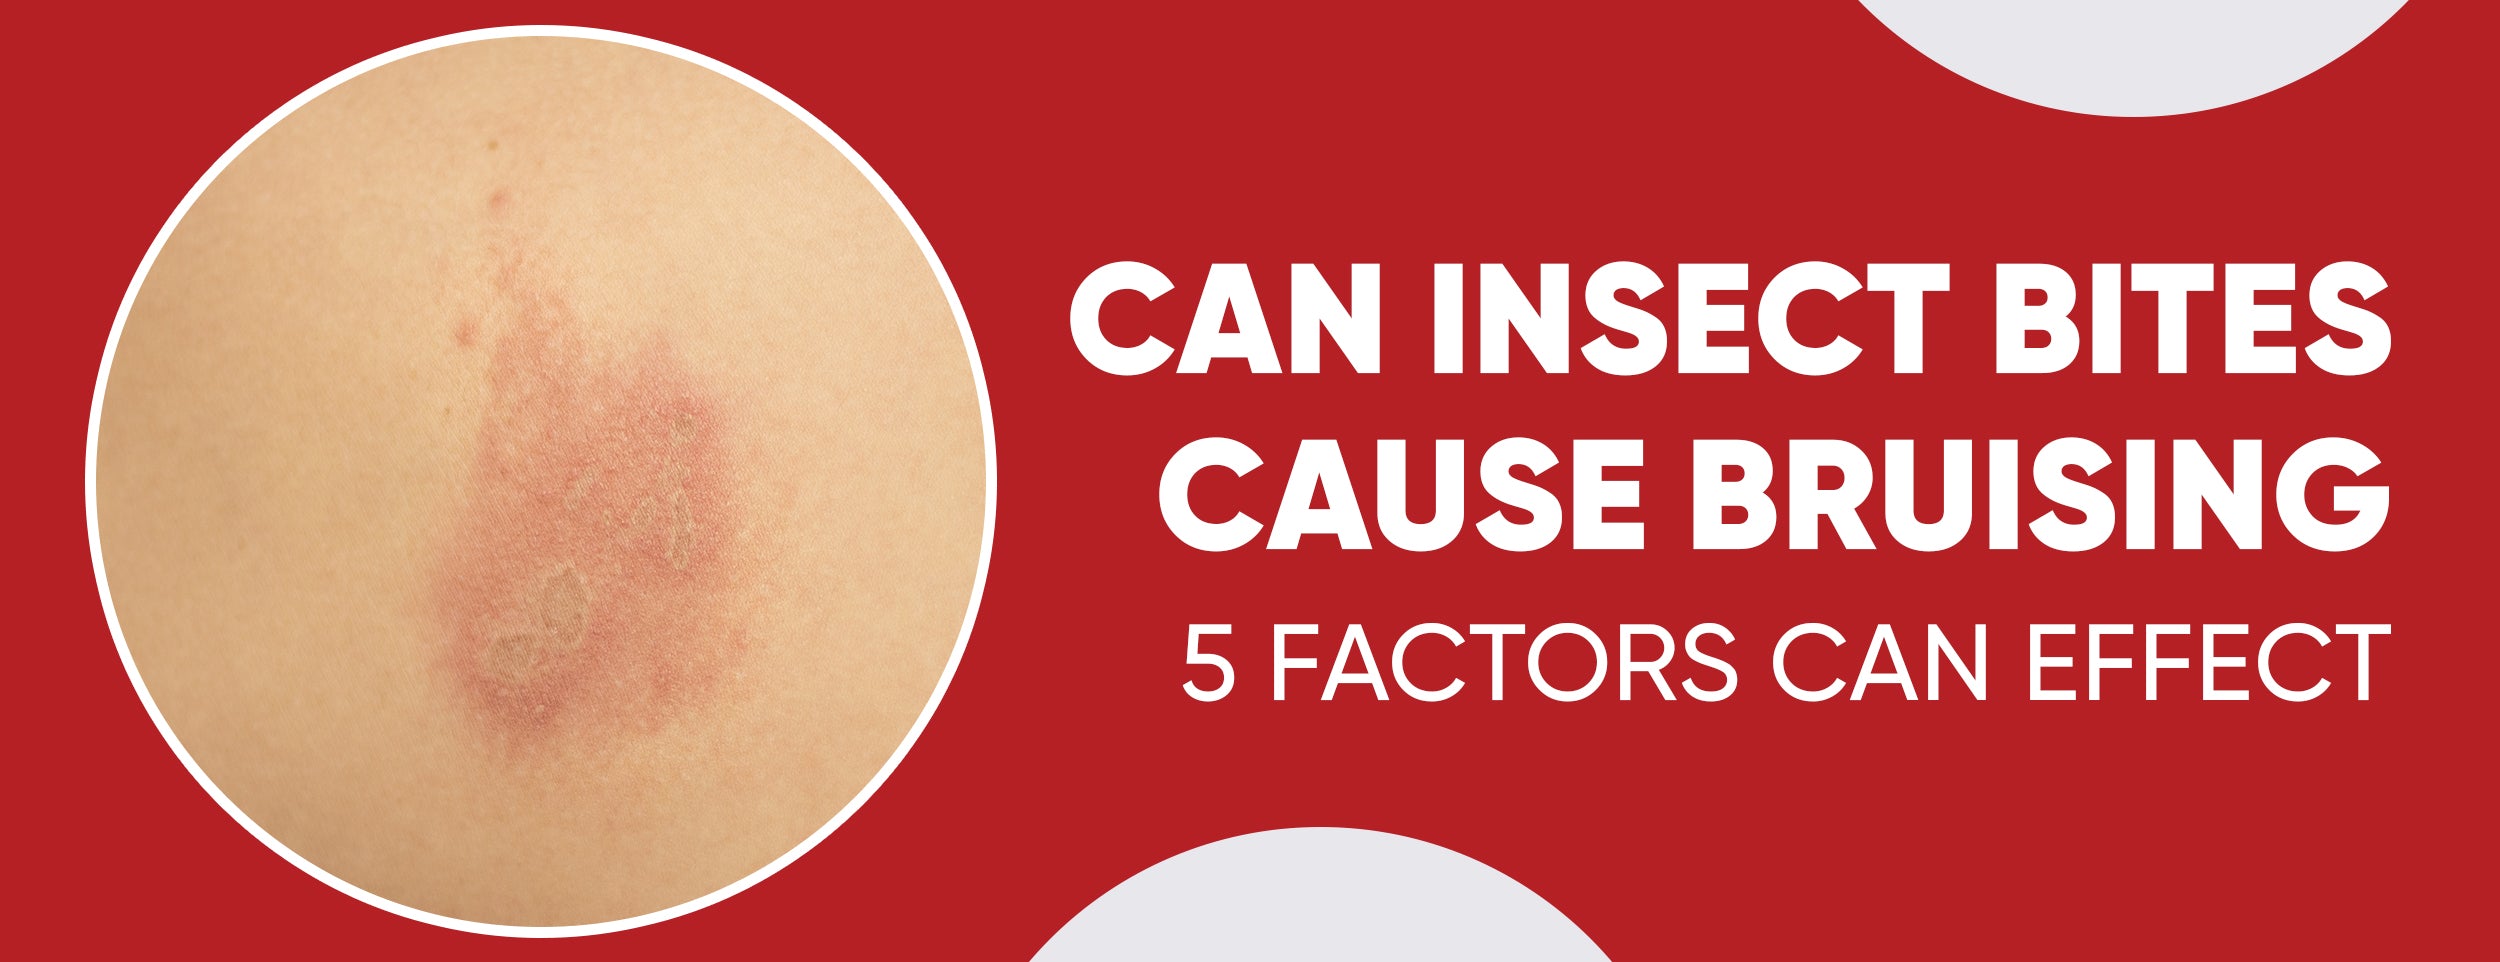 7 reasons and 8 treatments for insect bite bruising